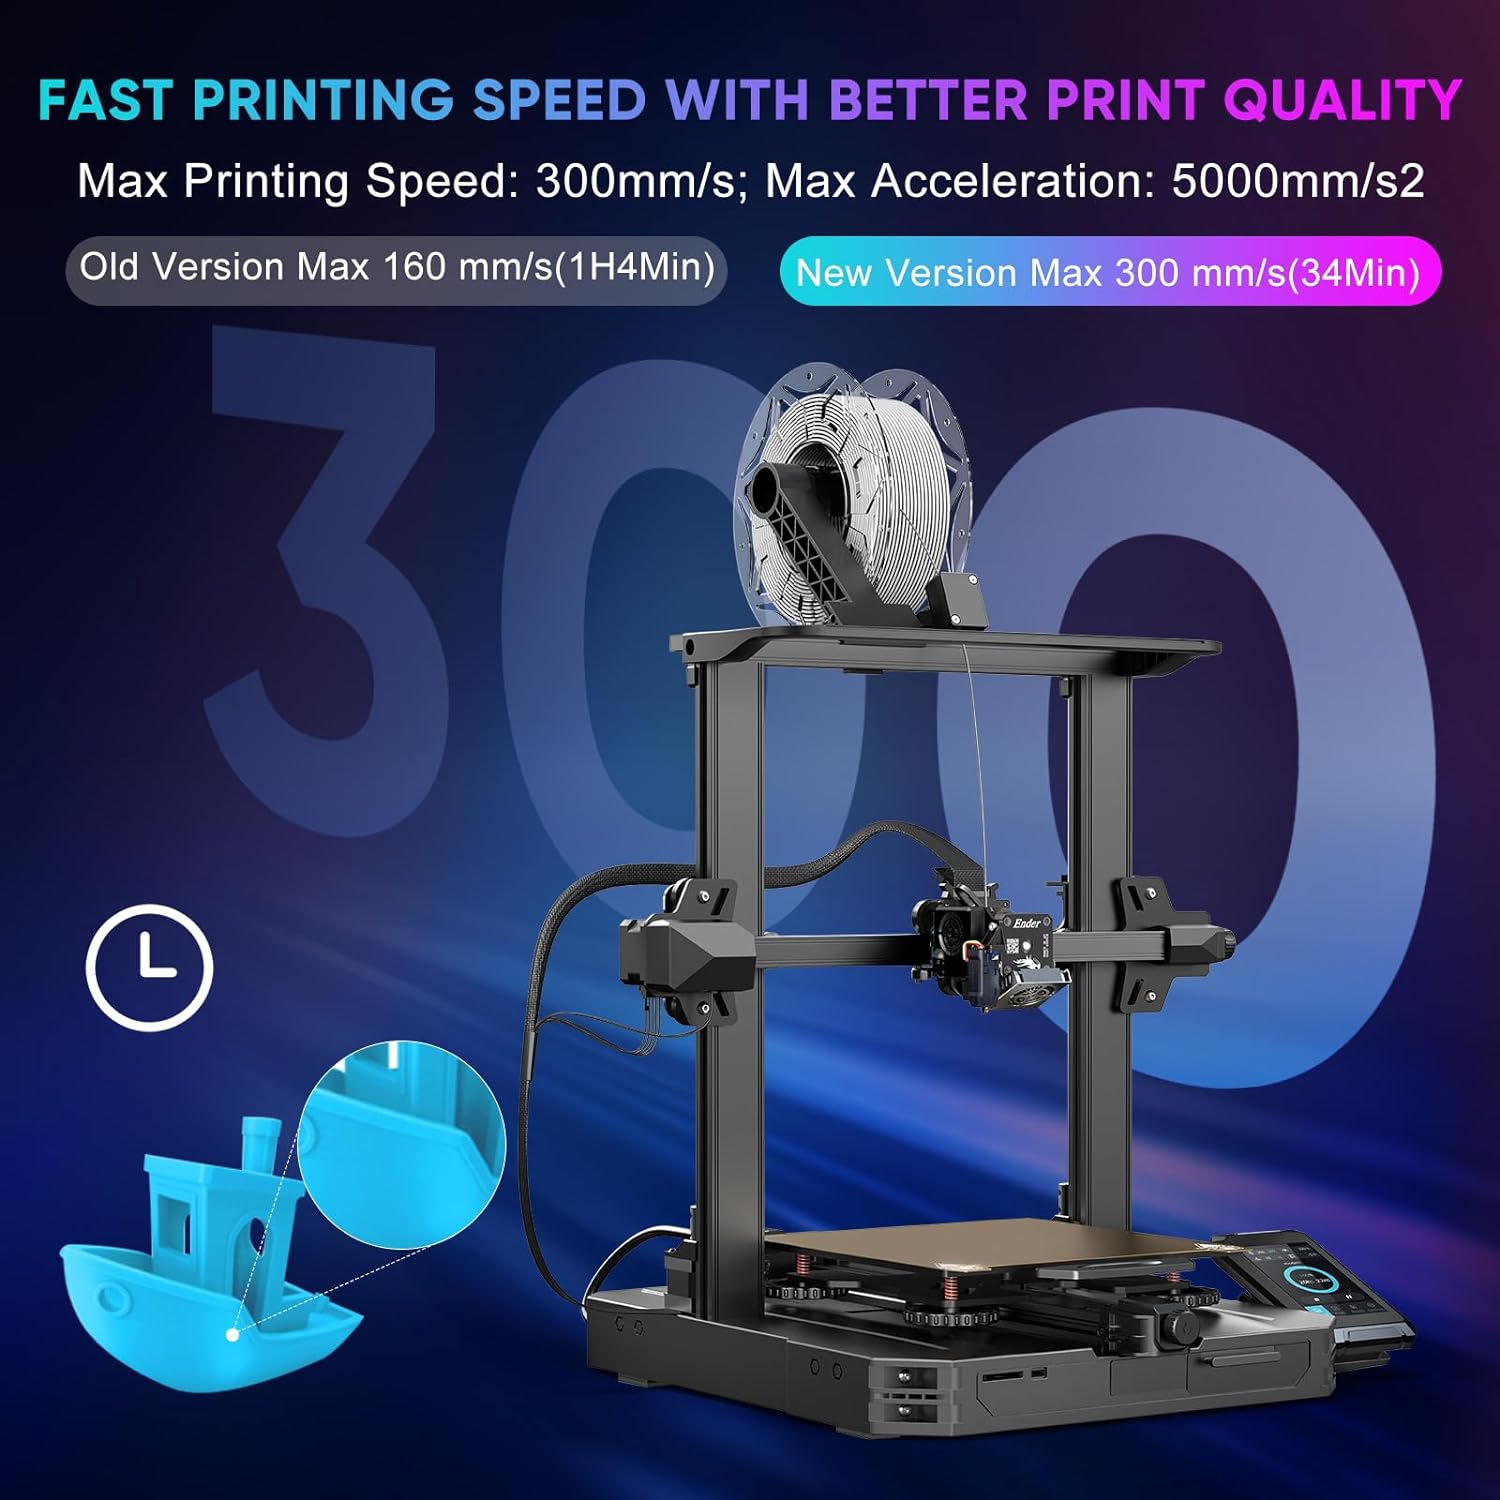 official-creality-ender-3-3d-printer-fully-open-source-with-resume-printing-all-metal-frame-fdm-diy-printers-with-resume-3 Creality Ender 3 3D Printer Review